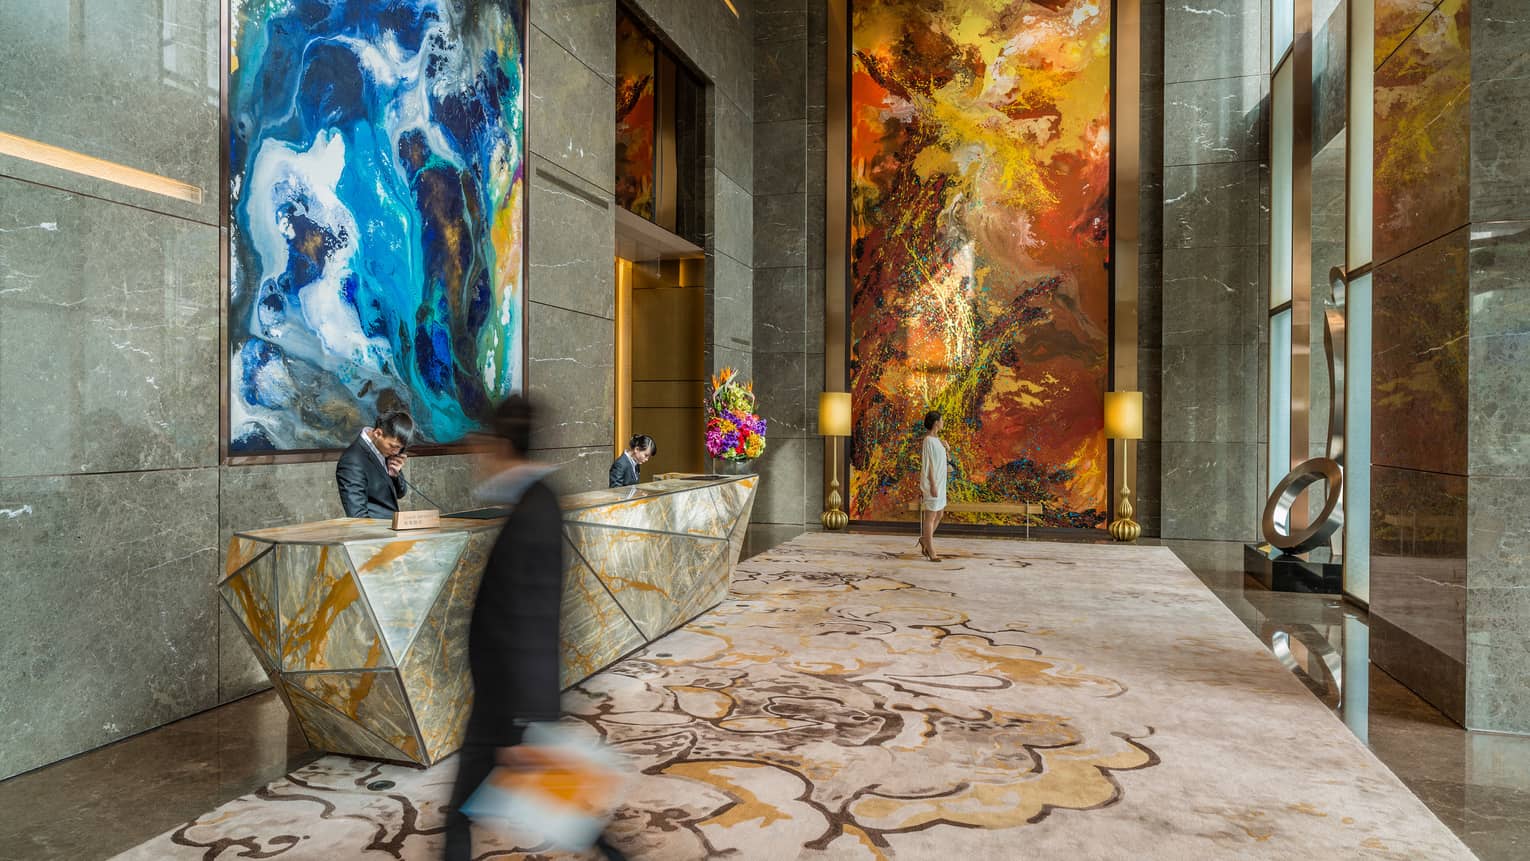 Man wearing suits walks through hotel lobby surrounded by marble, large modern art 